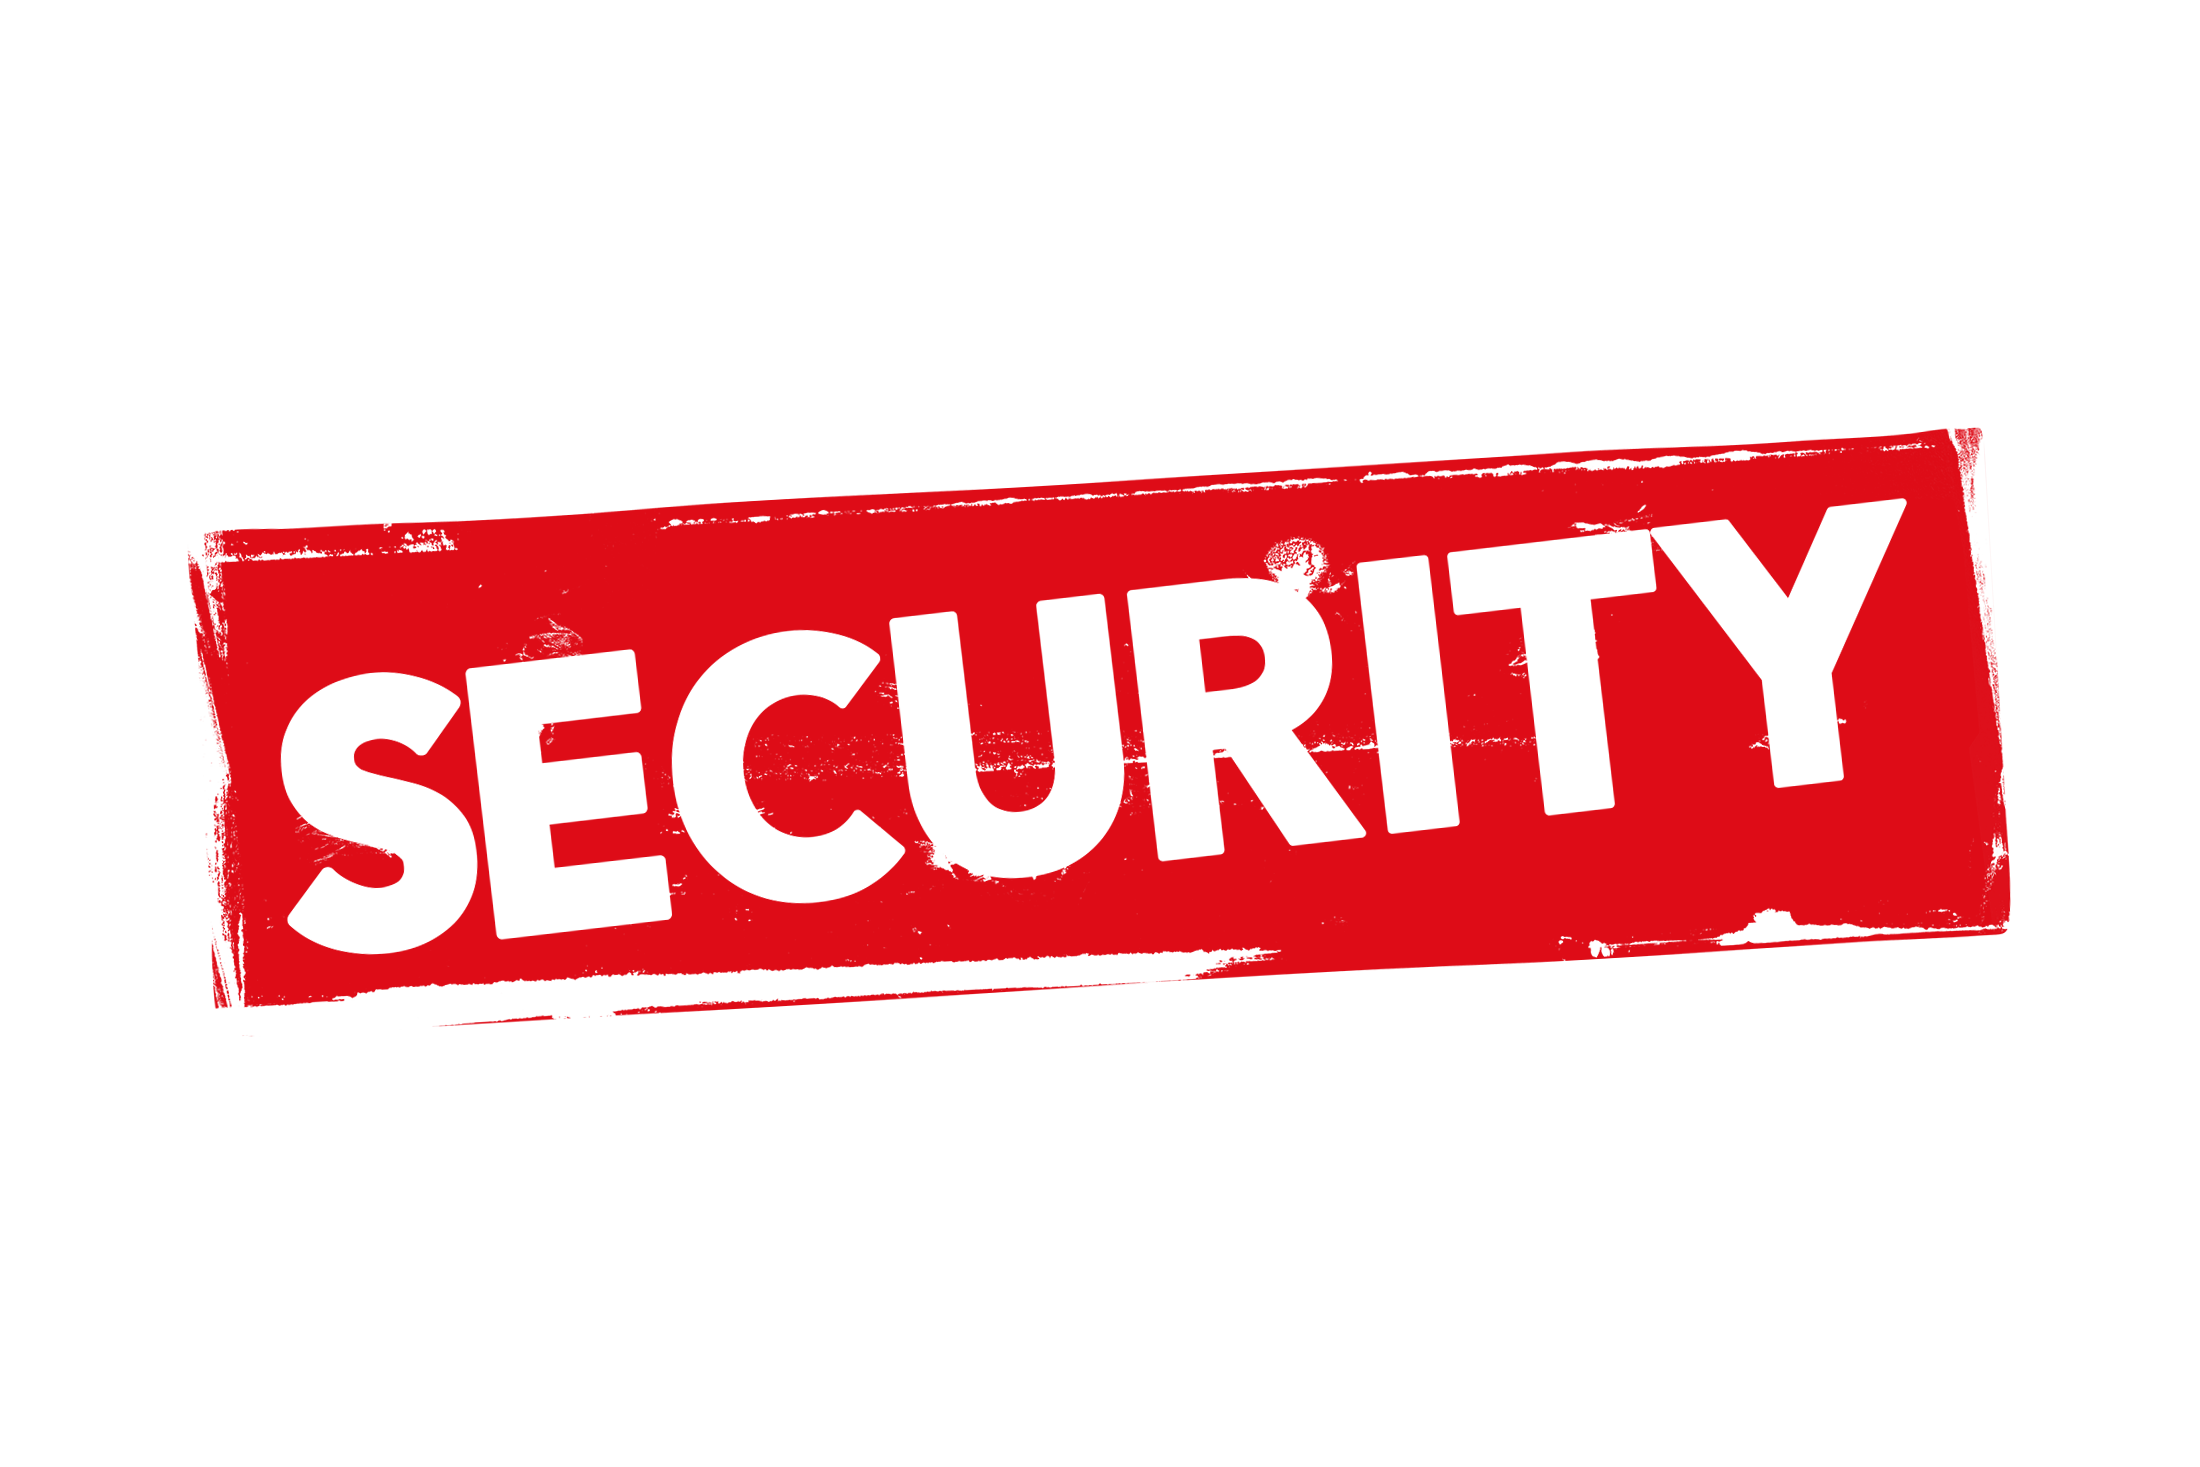 Grunge security label PNG and PSD